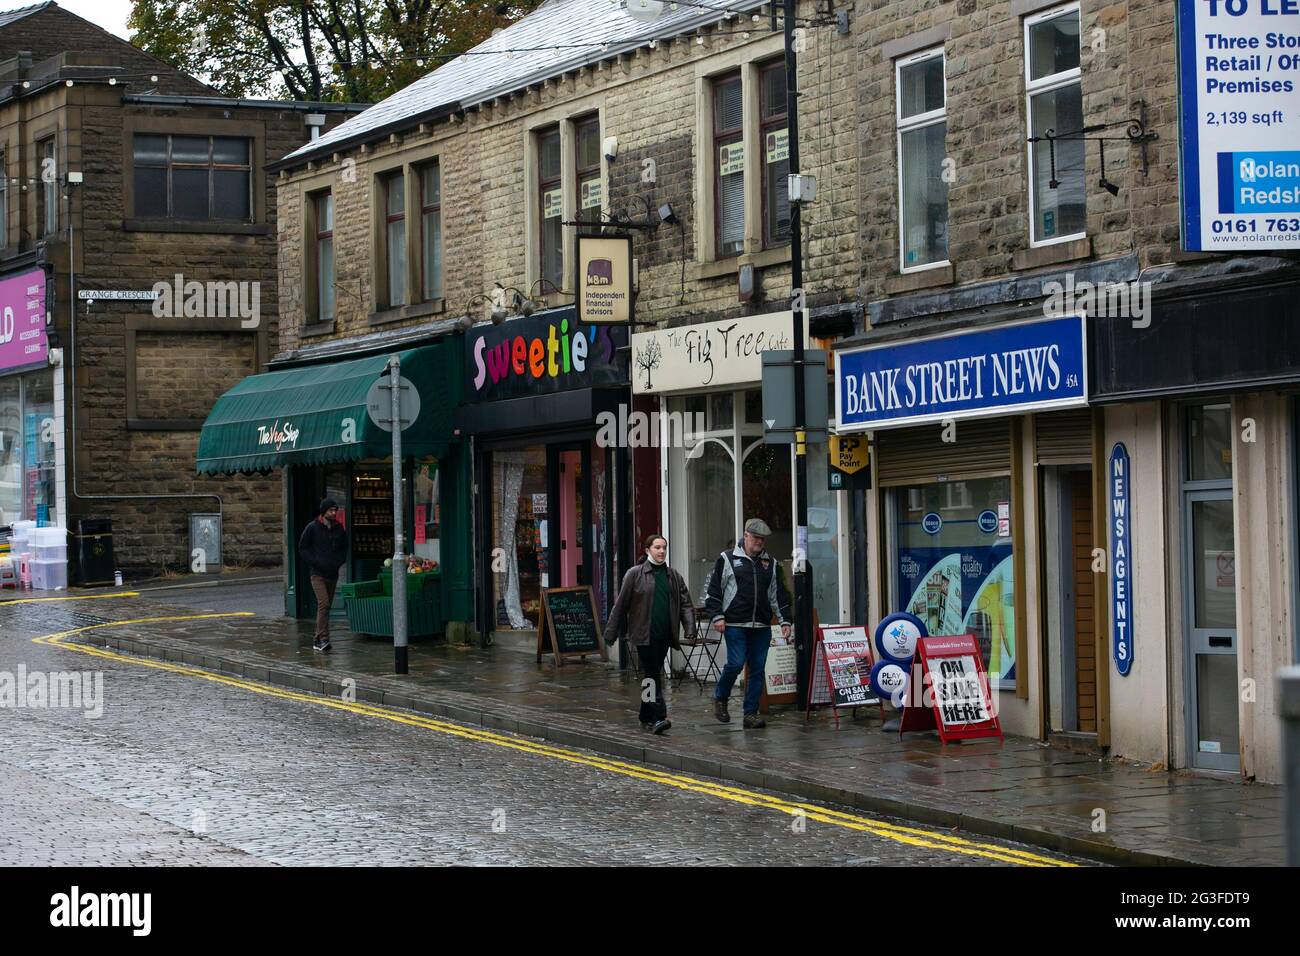 The town of Rawenstall in Lancashire, which is in the constituency of Rossendale and Darwen. The local MP for the area is the Conservative politician Stock Photo